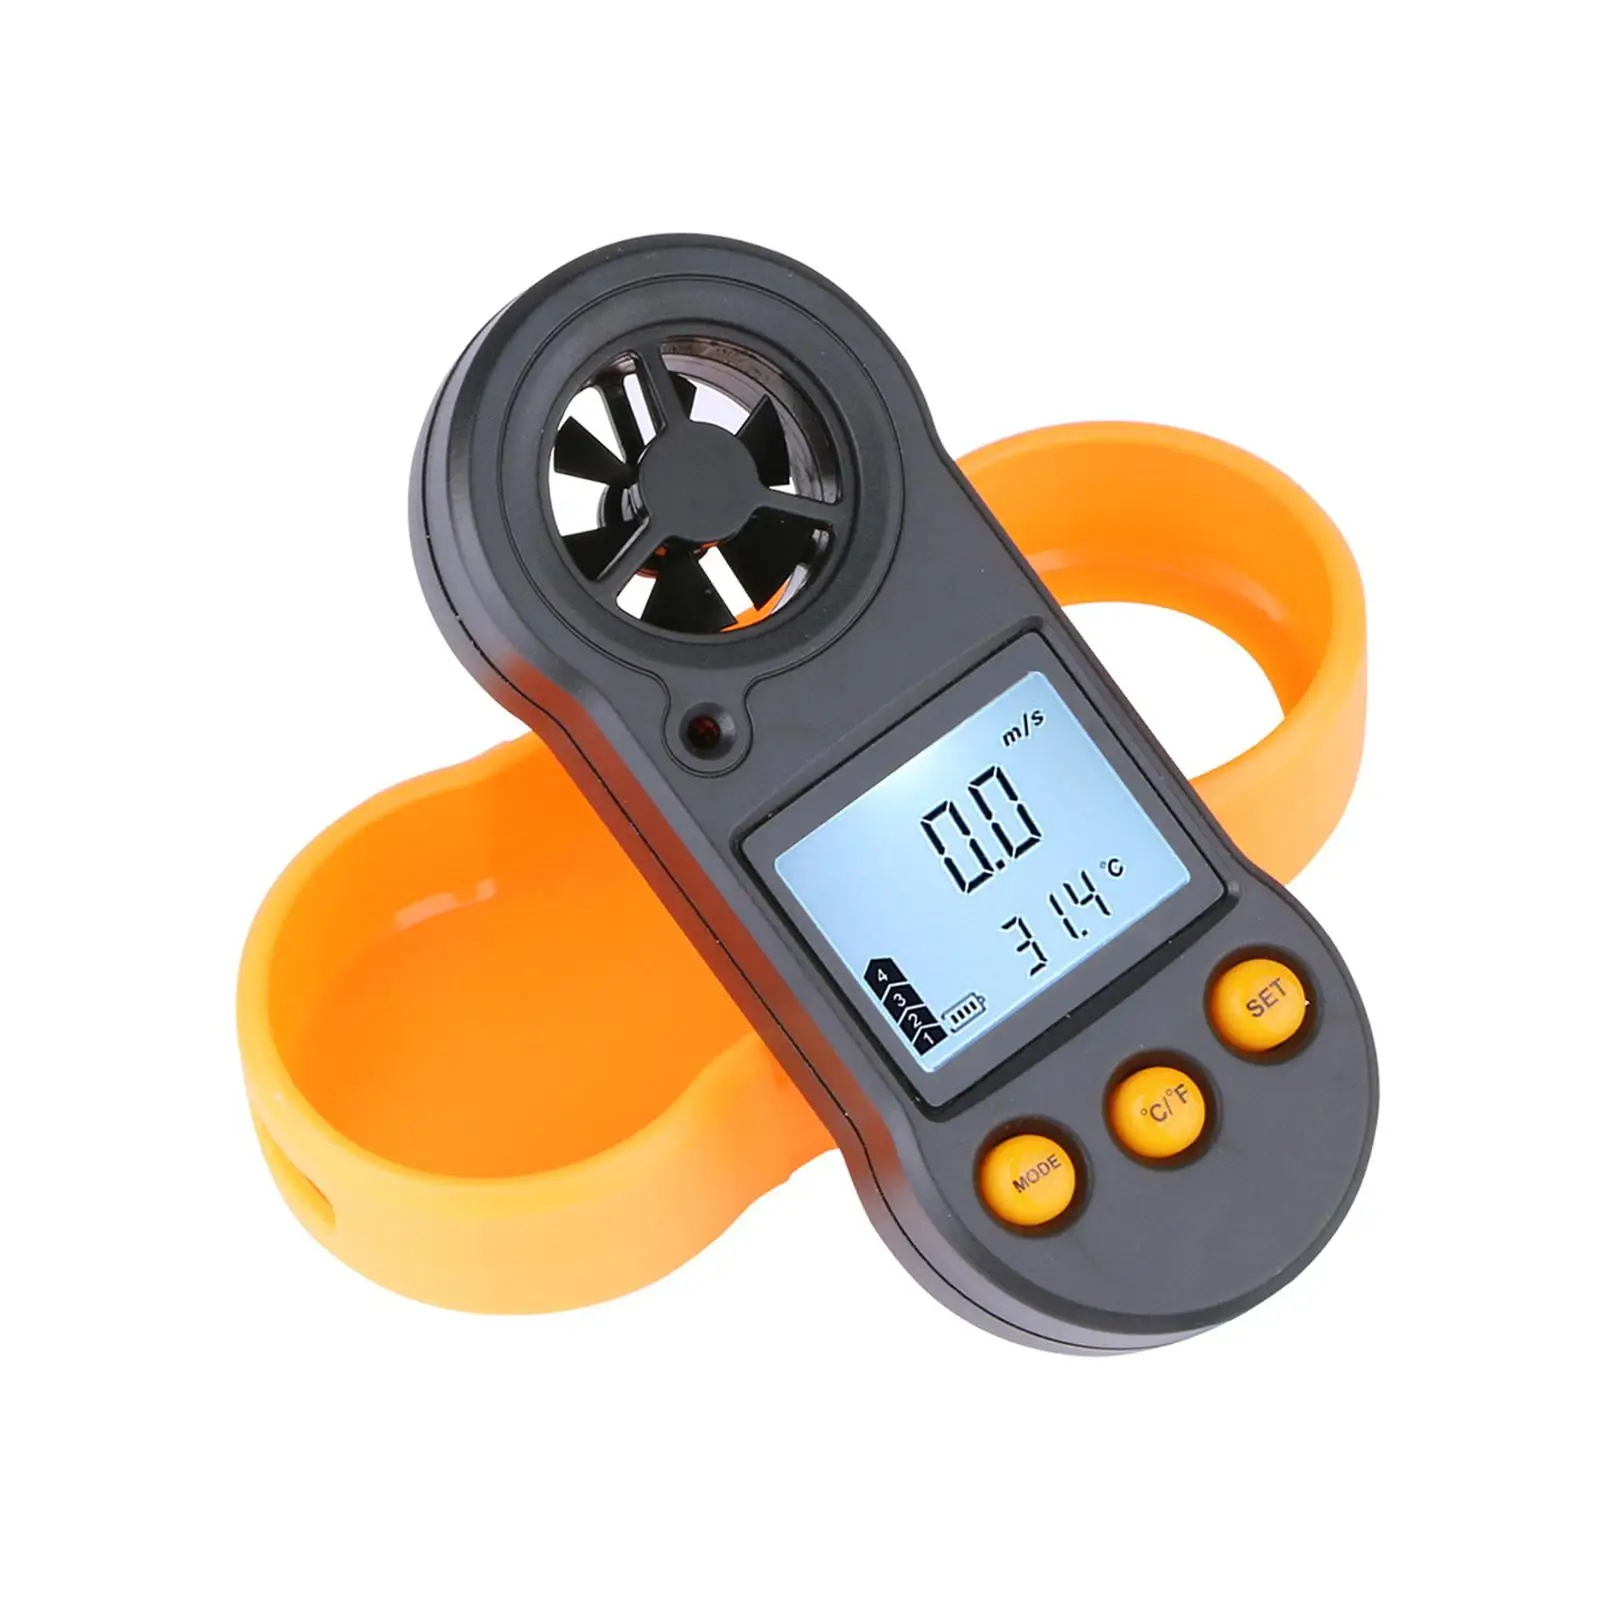 Wind Thermometer Gauge LCD Backlight Handhled Anemometer Portable Wind Gauge Wind and Temperature Meter for Surfing